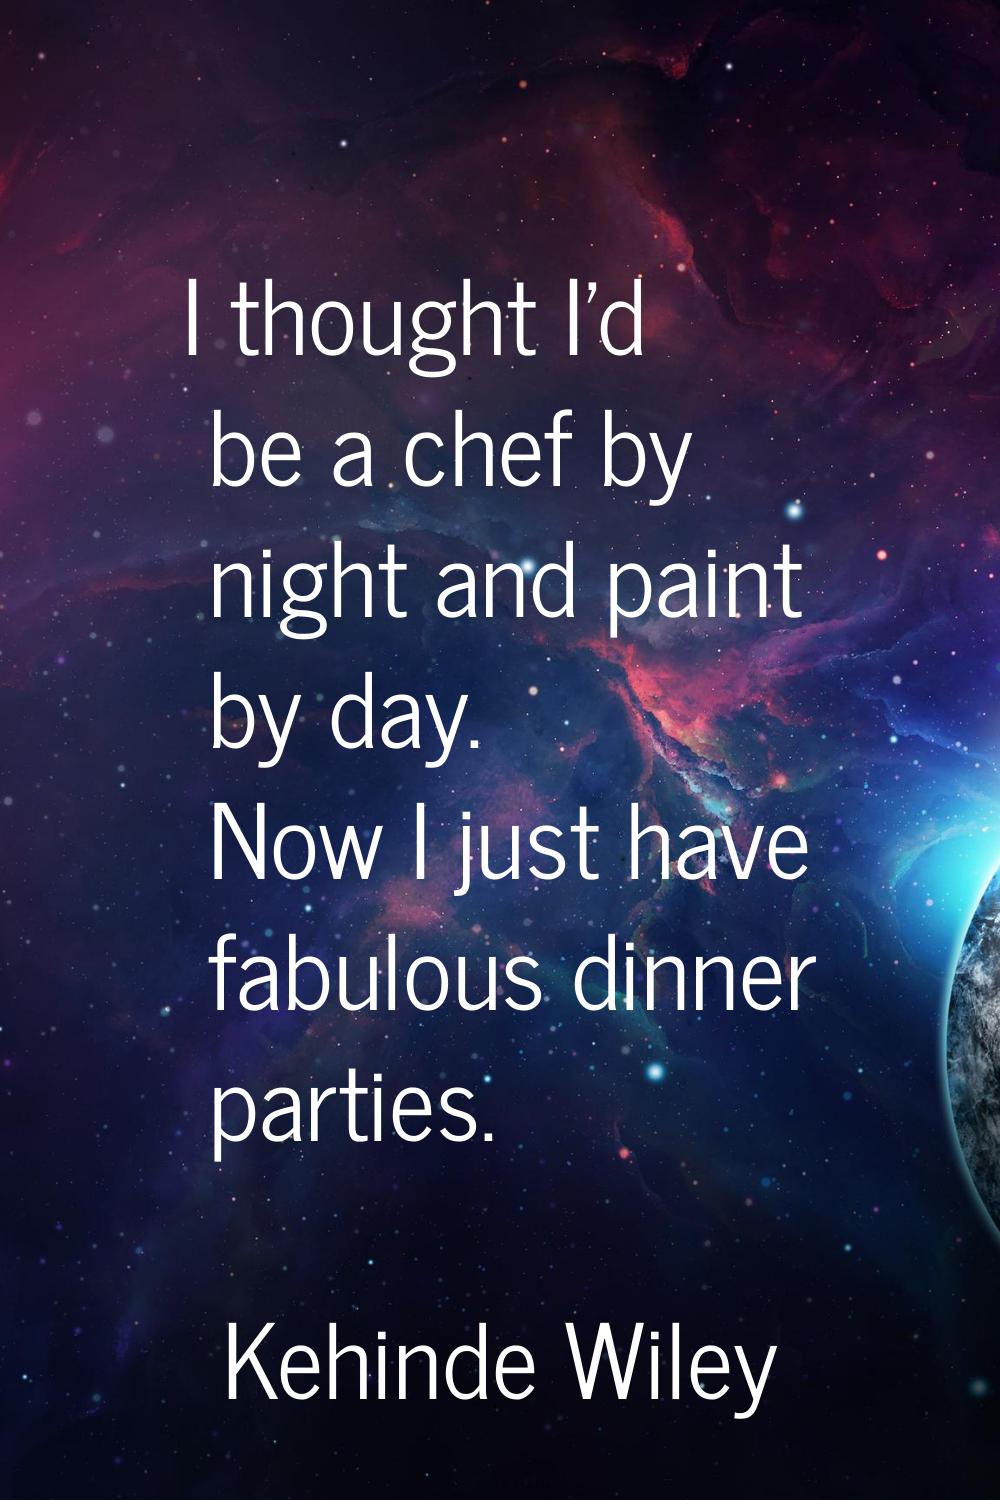 I thought I'd be a chef by night and paint by day. Now I just have fabulous dinner parties.